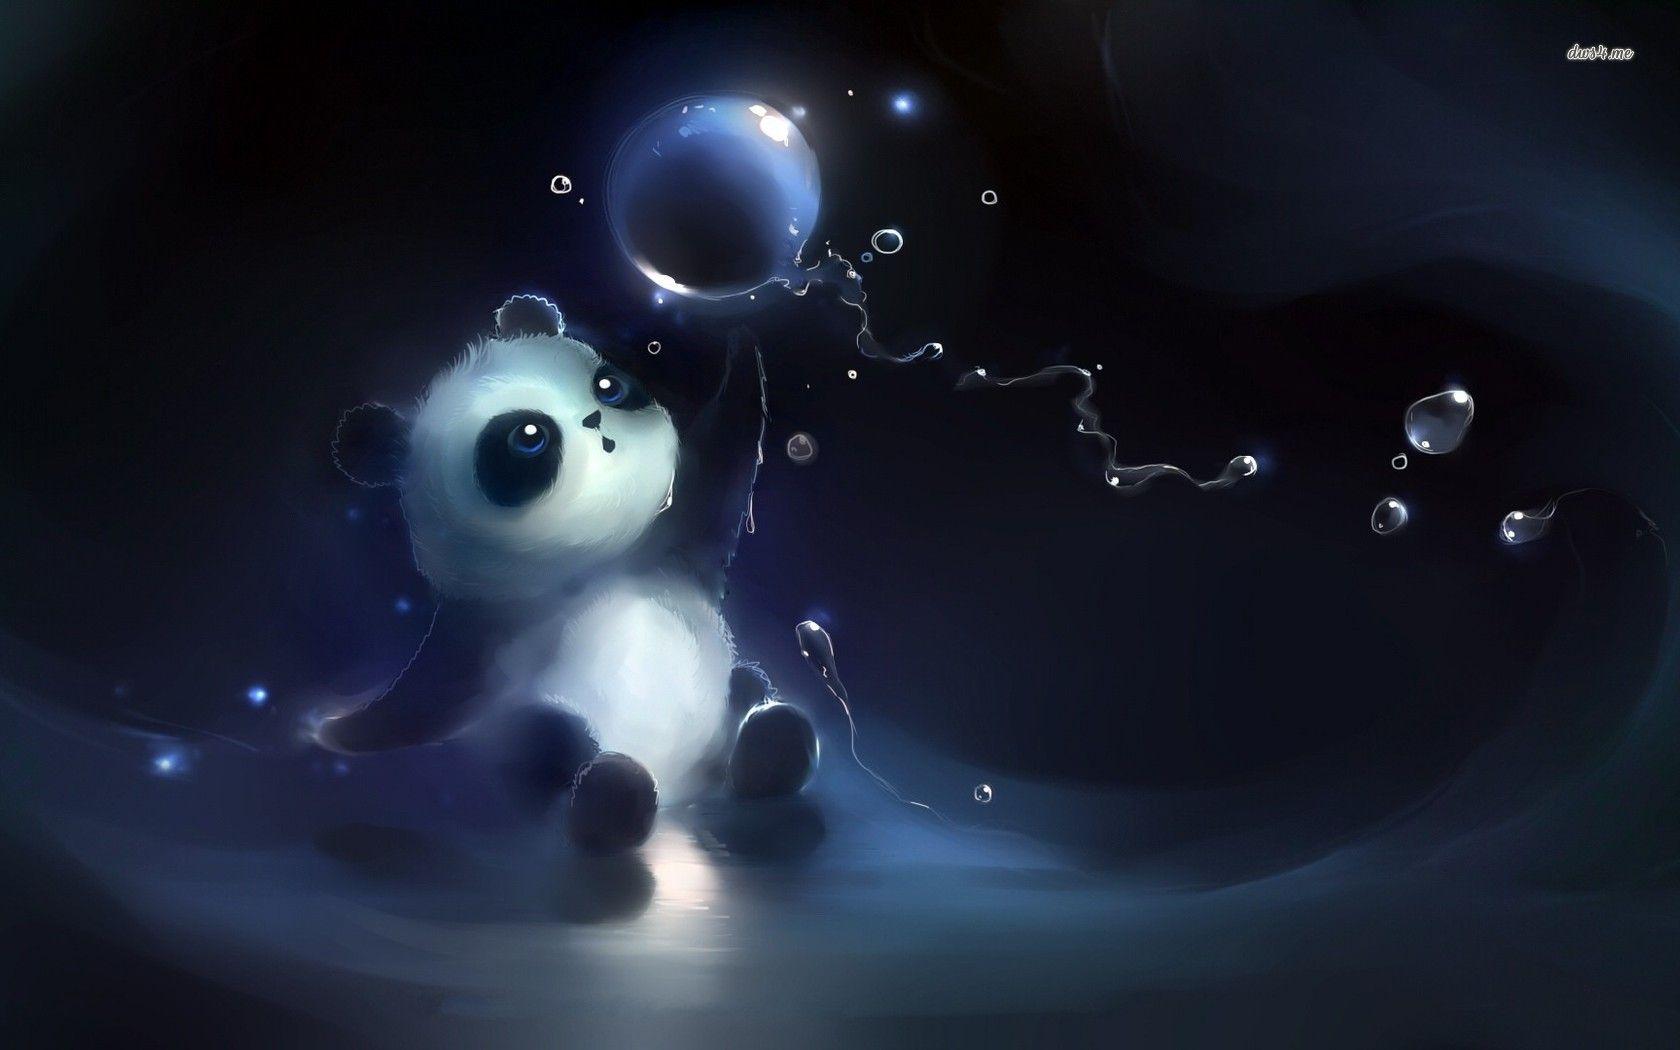 Collection of Baby Panda Wallpaper on HDWallpaper 1680×1050 Cute Baby Panda Wallpaper (57 Wallpaper). Cute panda wallpaper, Panda wallpaper, Panda background